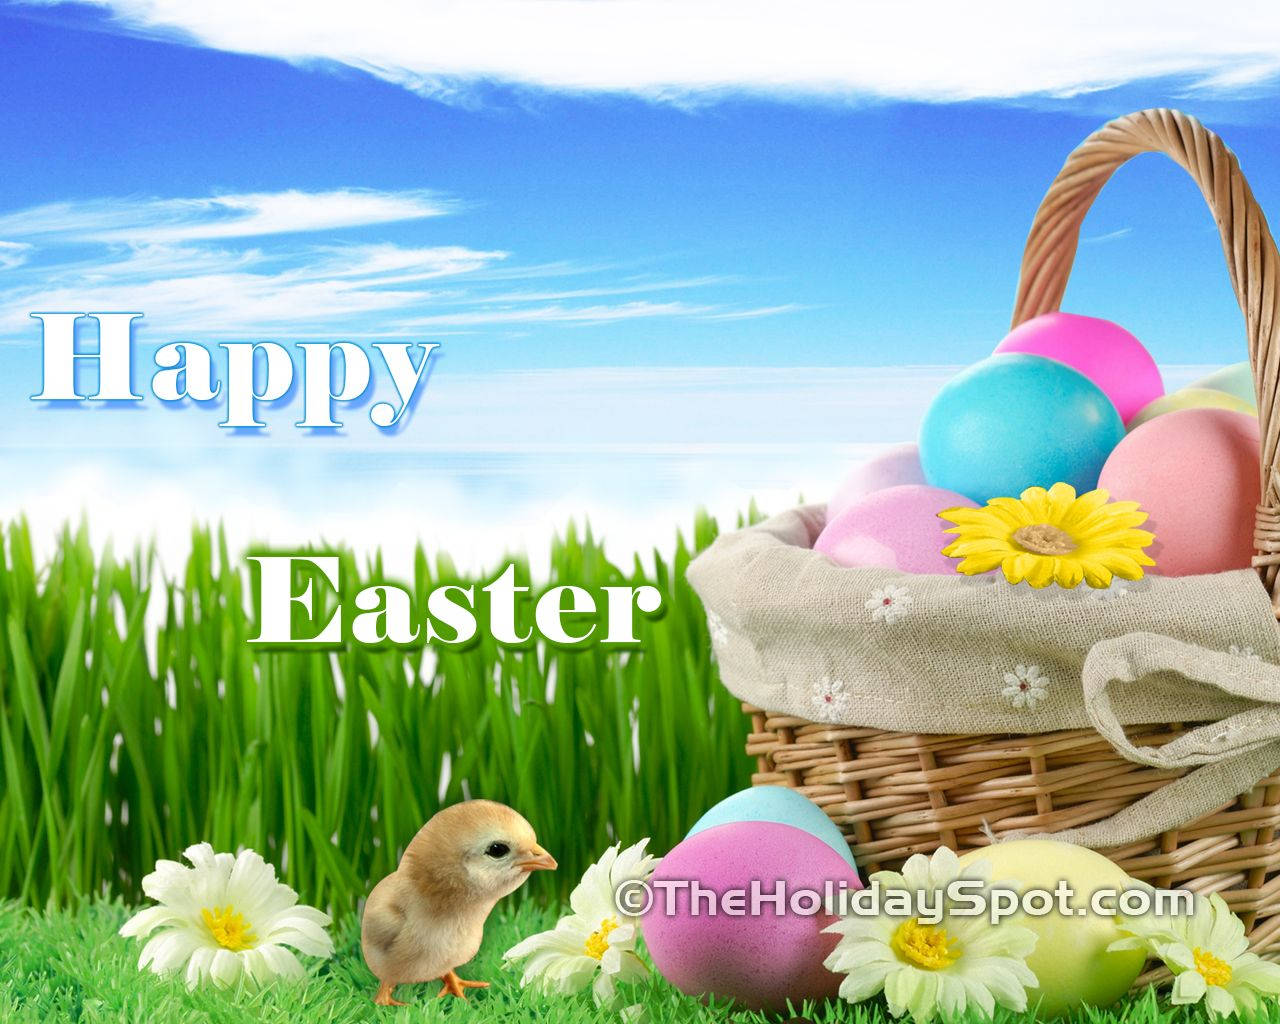 Happy Easter Greetings With Eggs And Chick